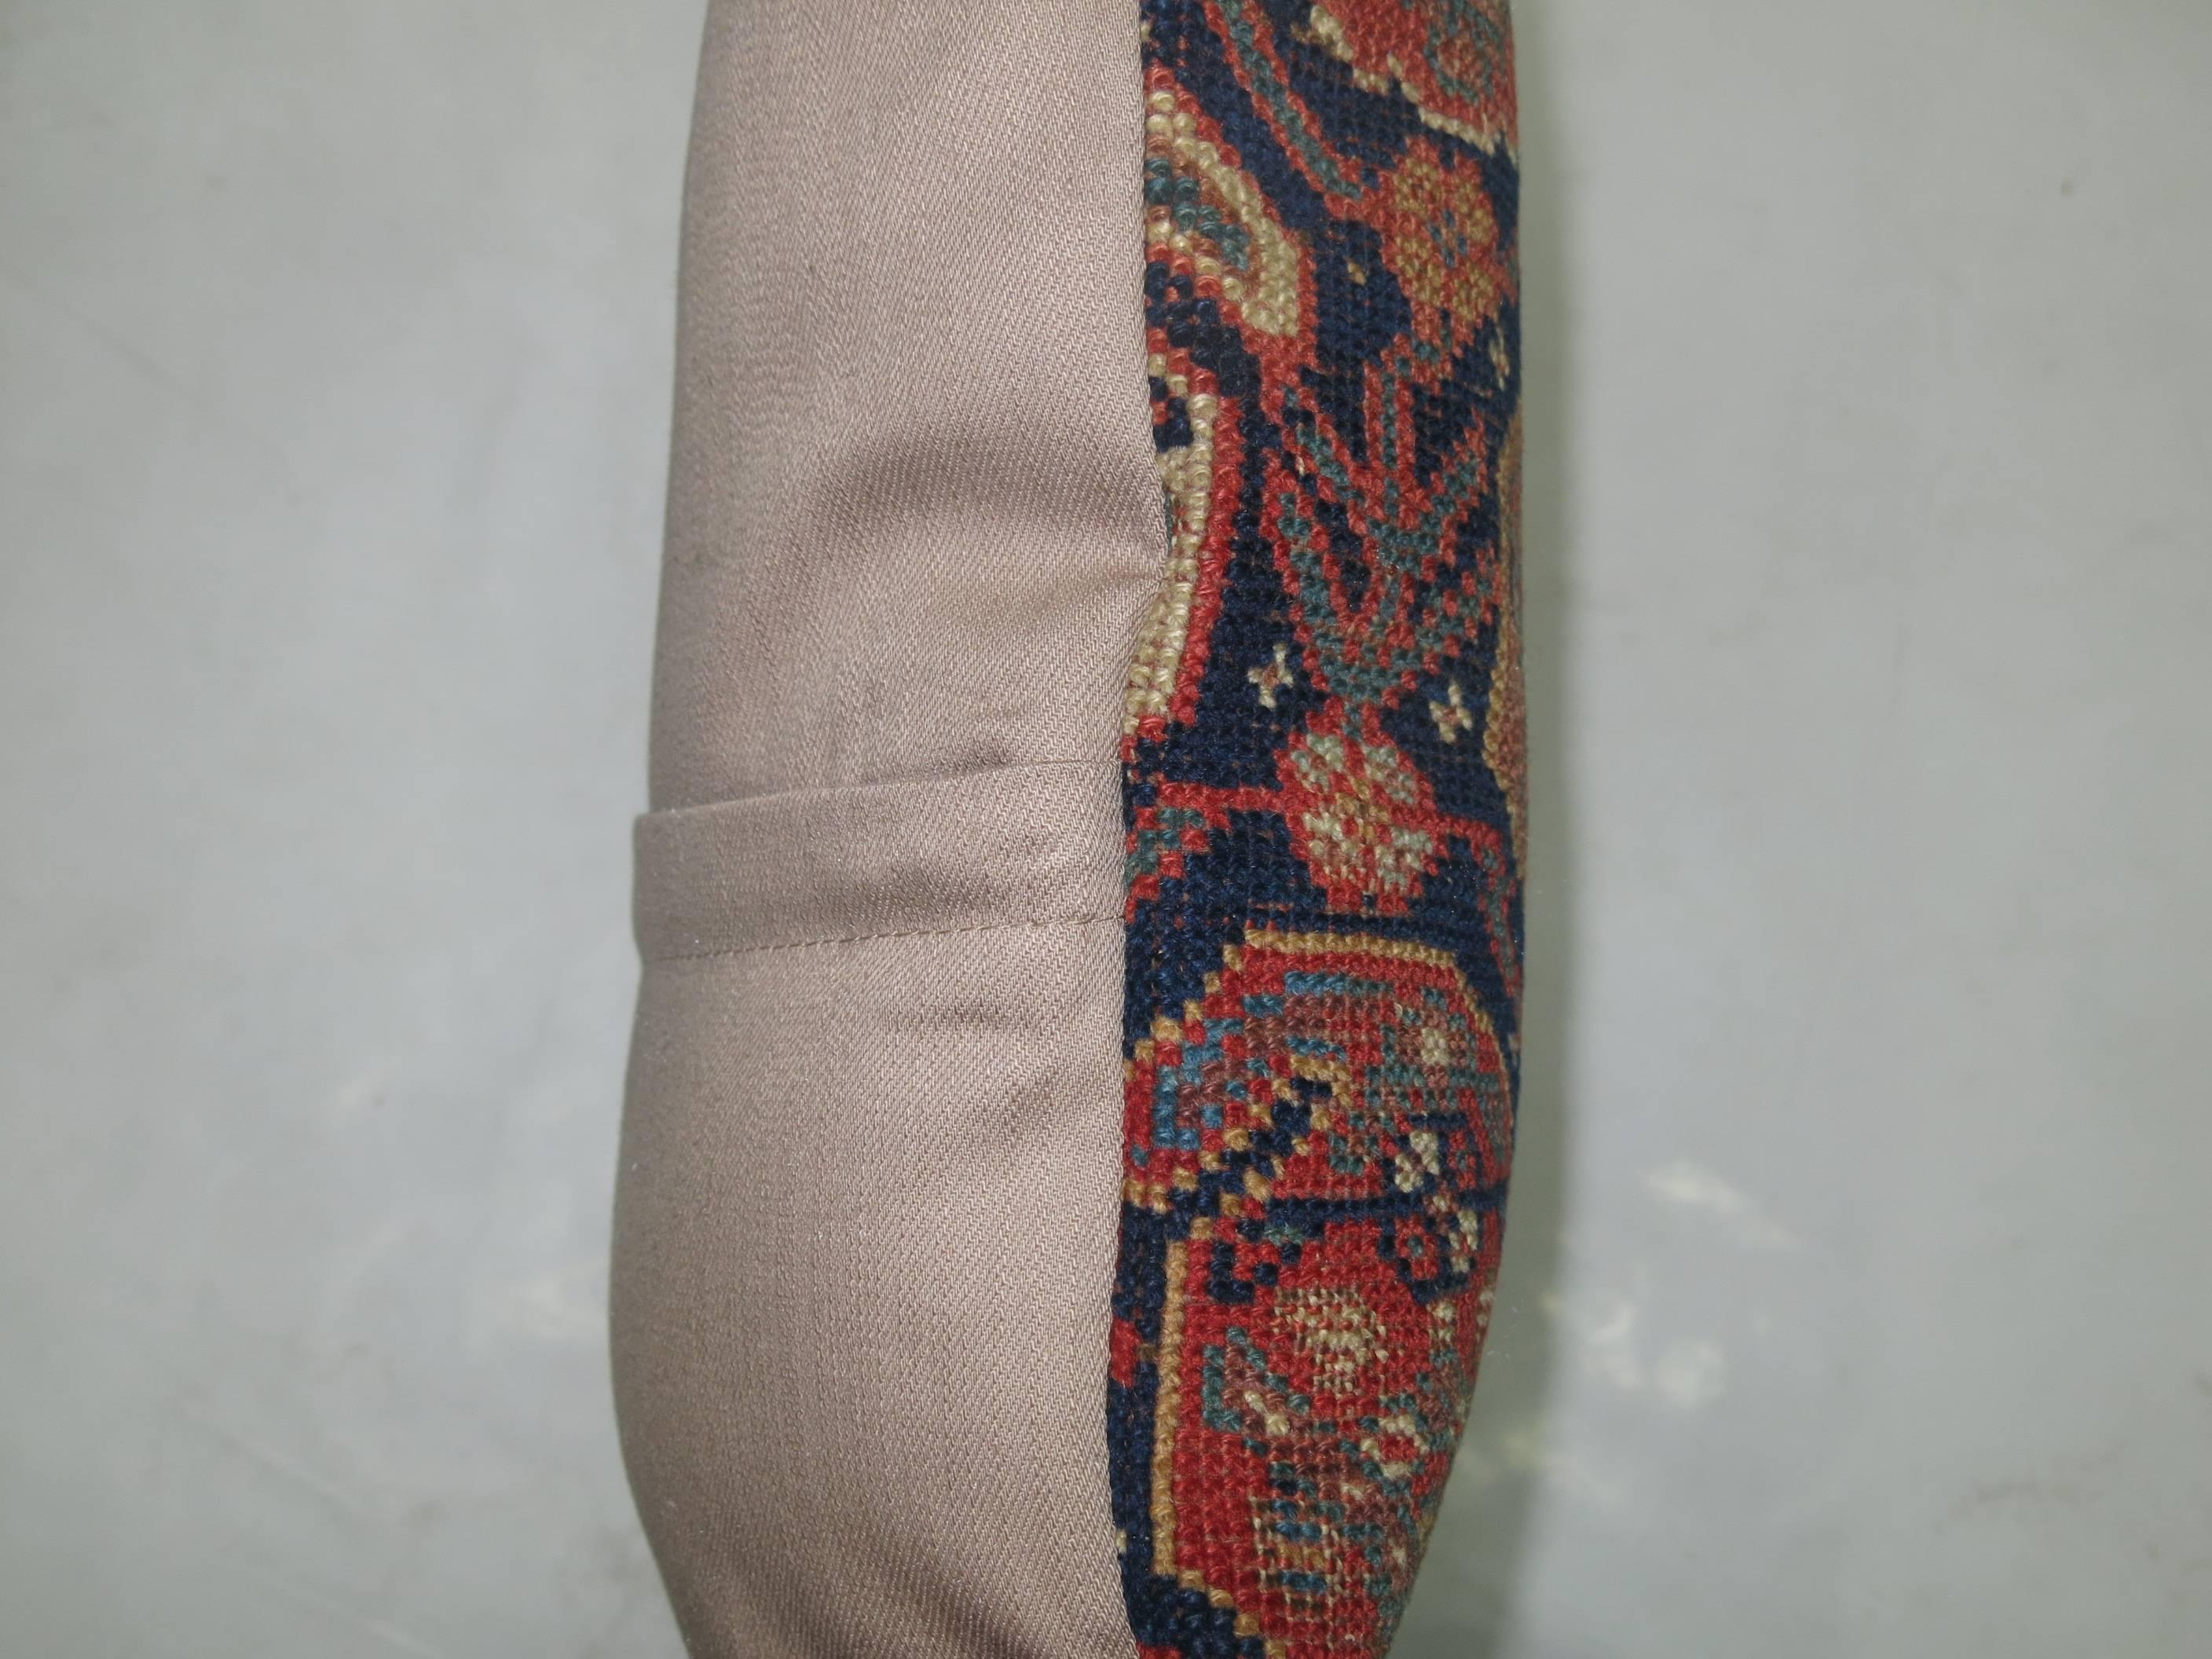 Pillow made from a 19th century Persian Afshar rug
Measures: 17'' x 18''.